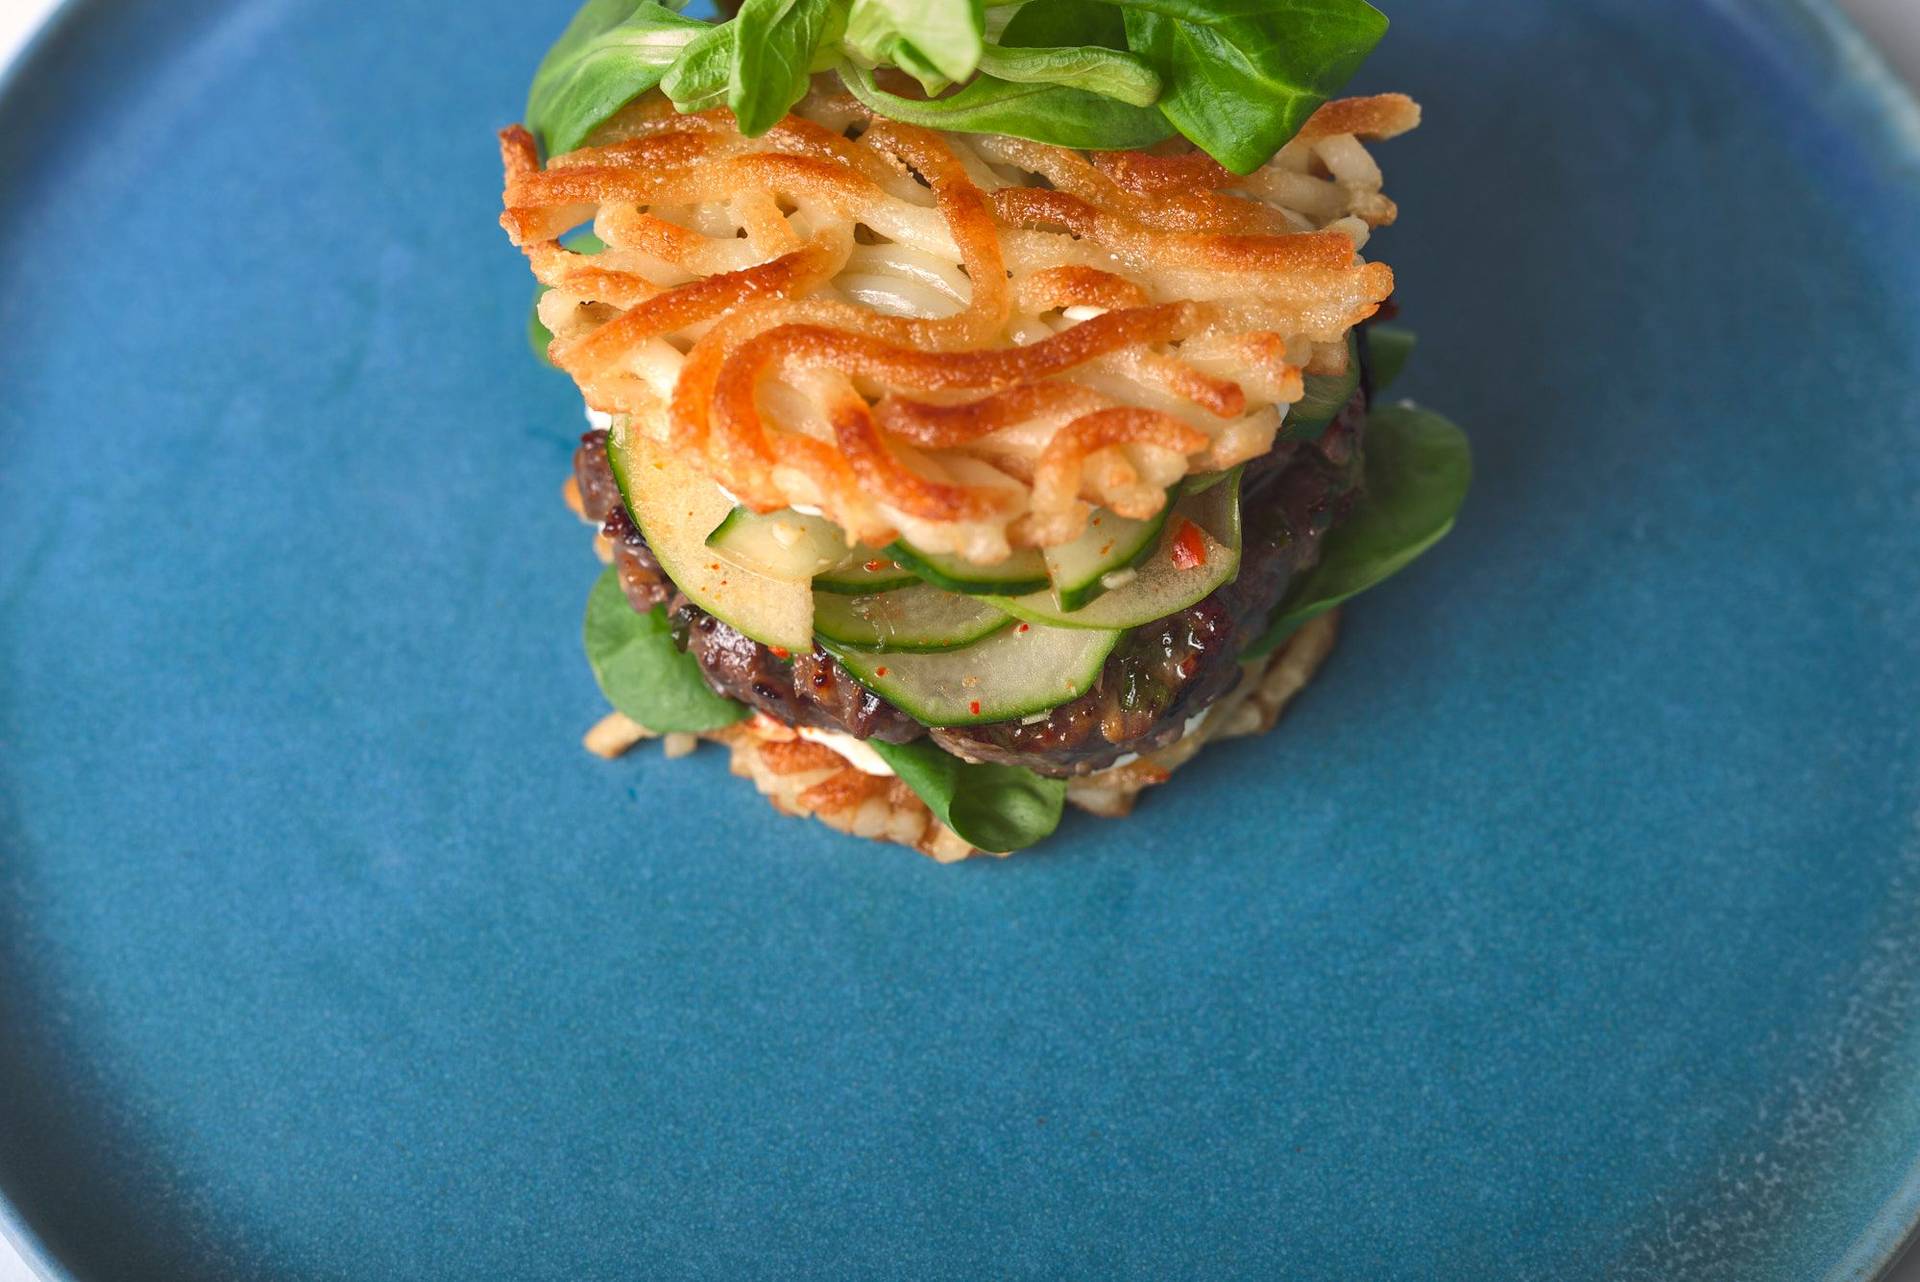 bulgogi beef burger with cucumber kimchi and udon noodle buns on a blue ceramic plate